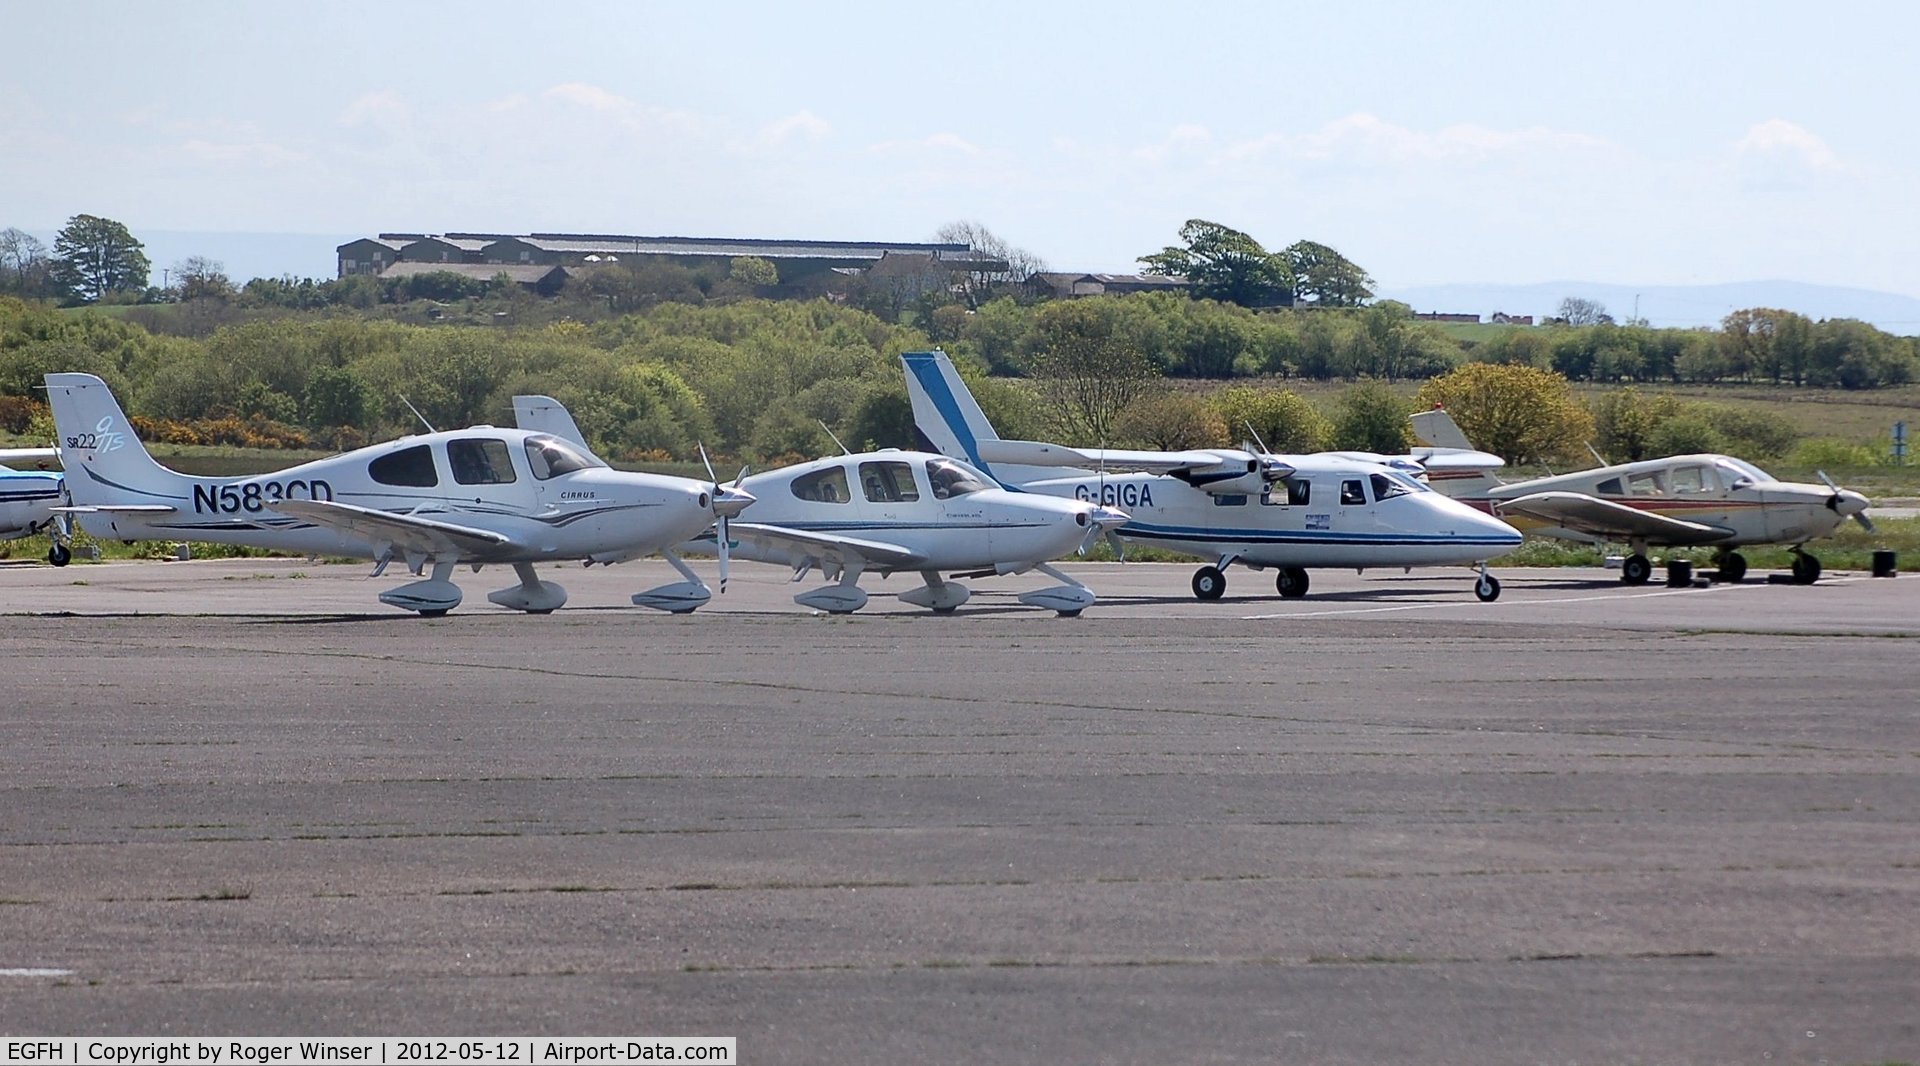 Swansea Airport, Swansea, Wales United Kingdom (EGFH) - Visiting and resident aircraft.